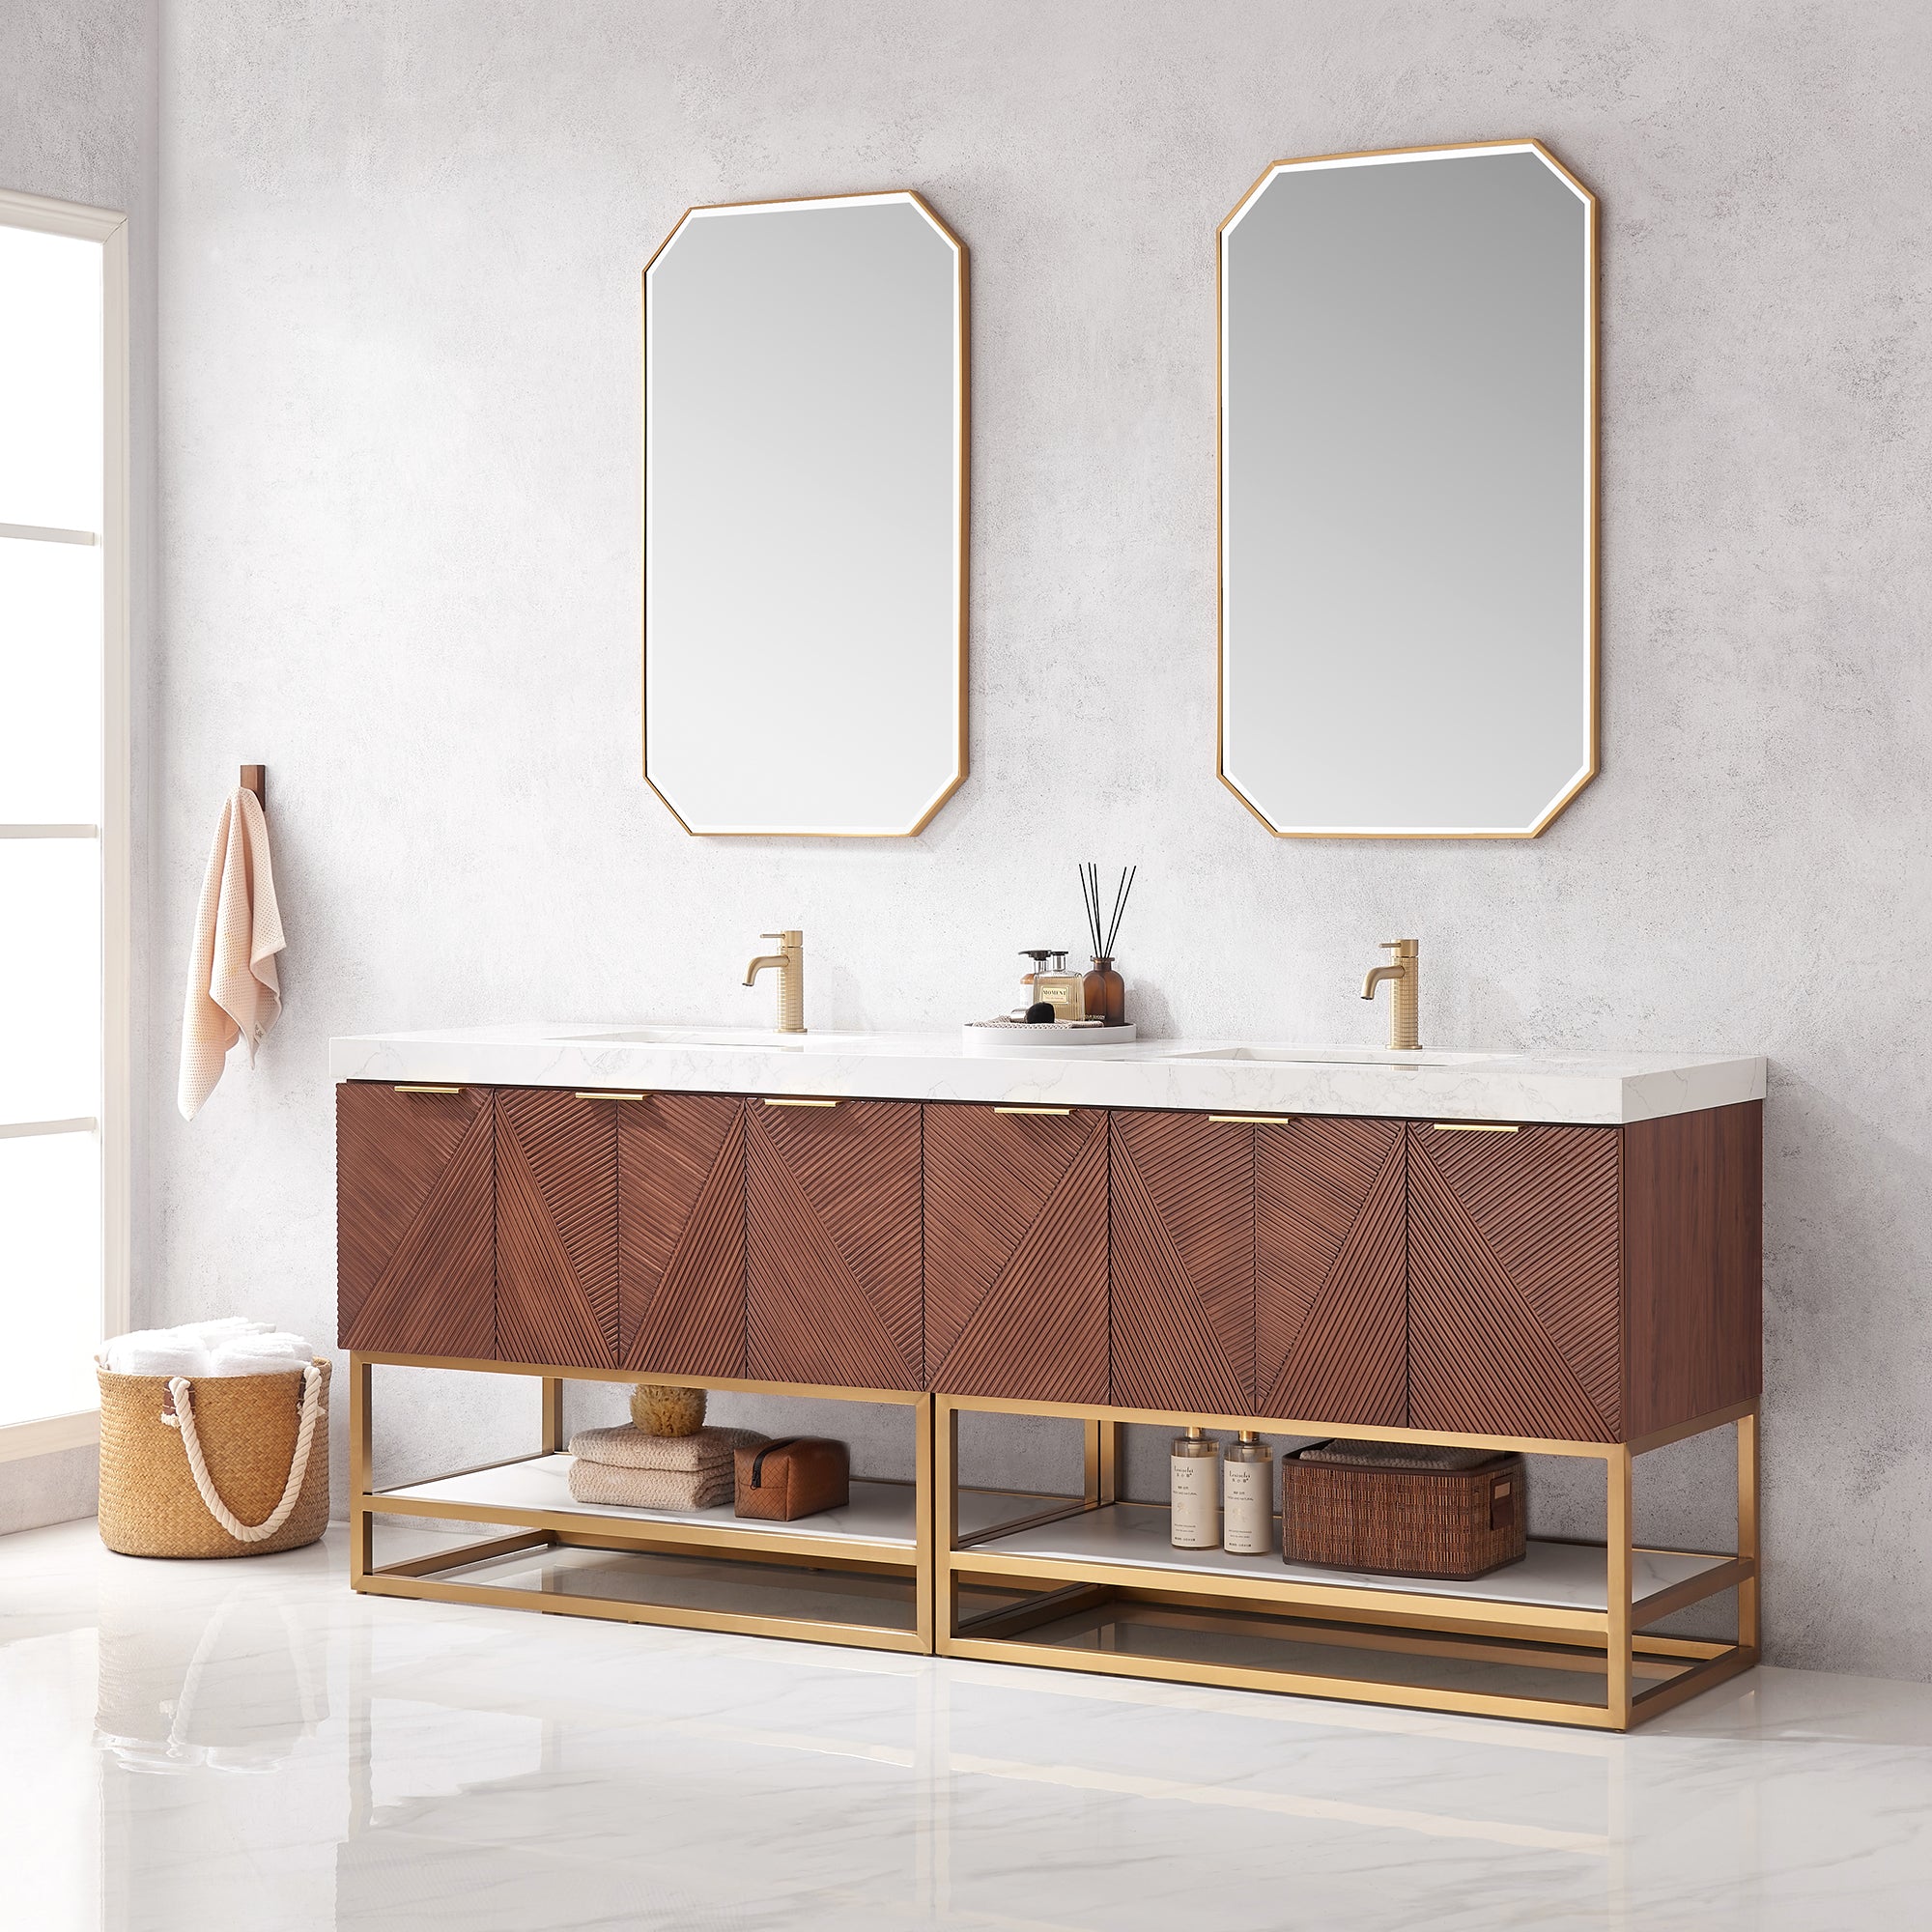 Mahon 84G" Free-standing Double Bath Vanity in North American Deep Walnut with White Grain Composite Stone Top